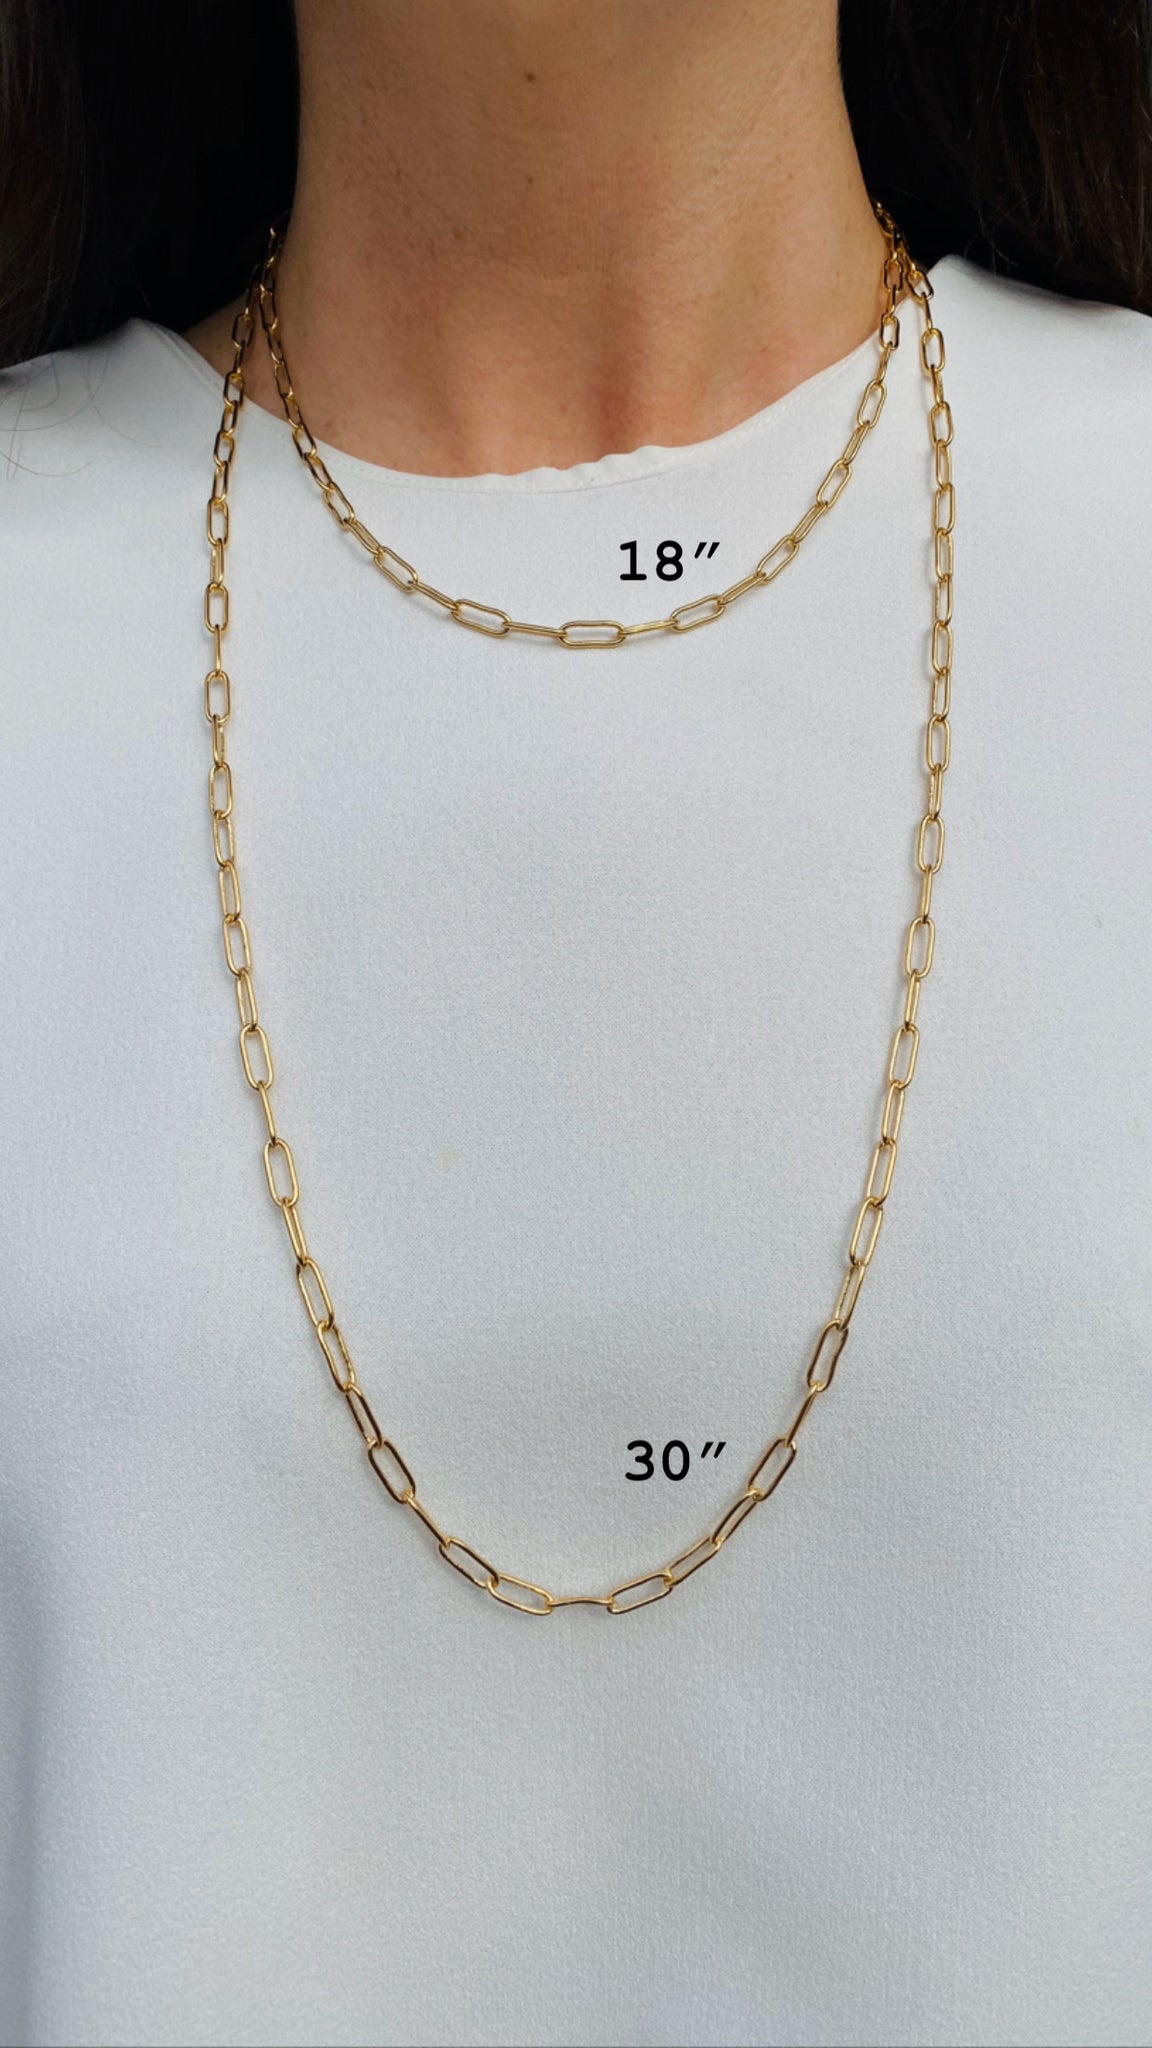 18-inch necklace